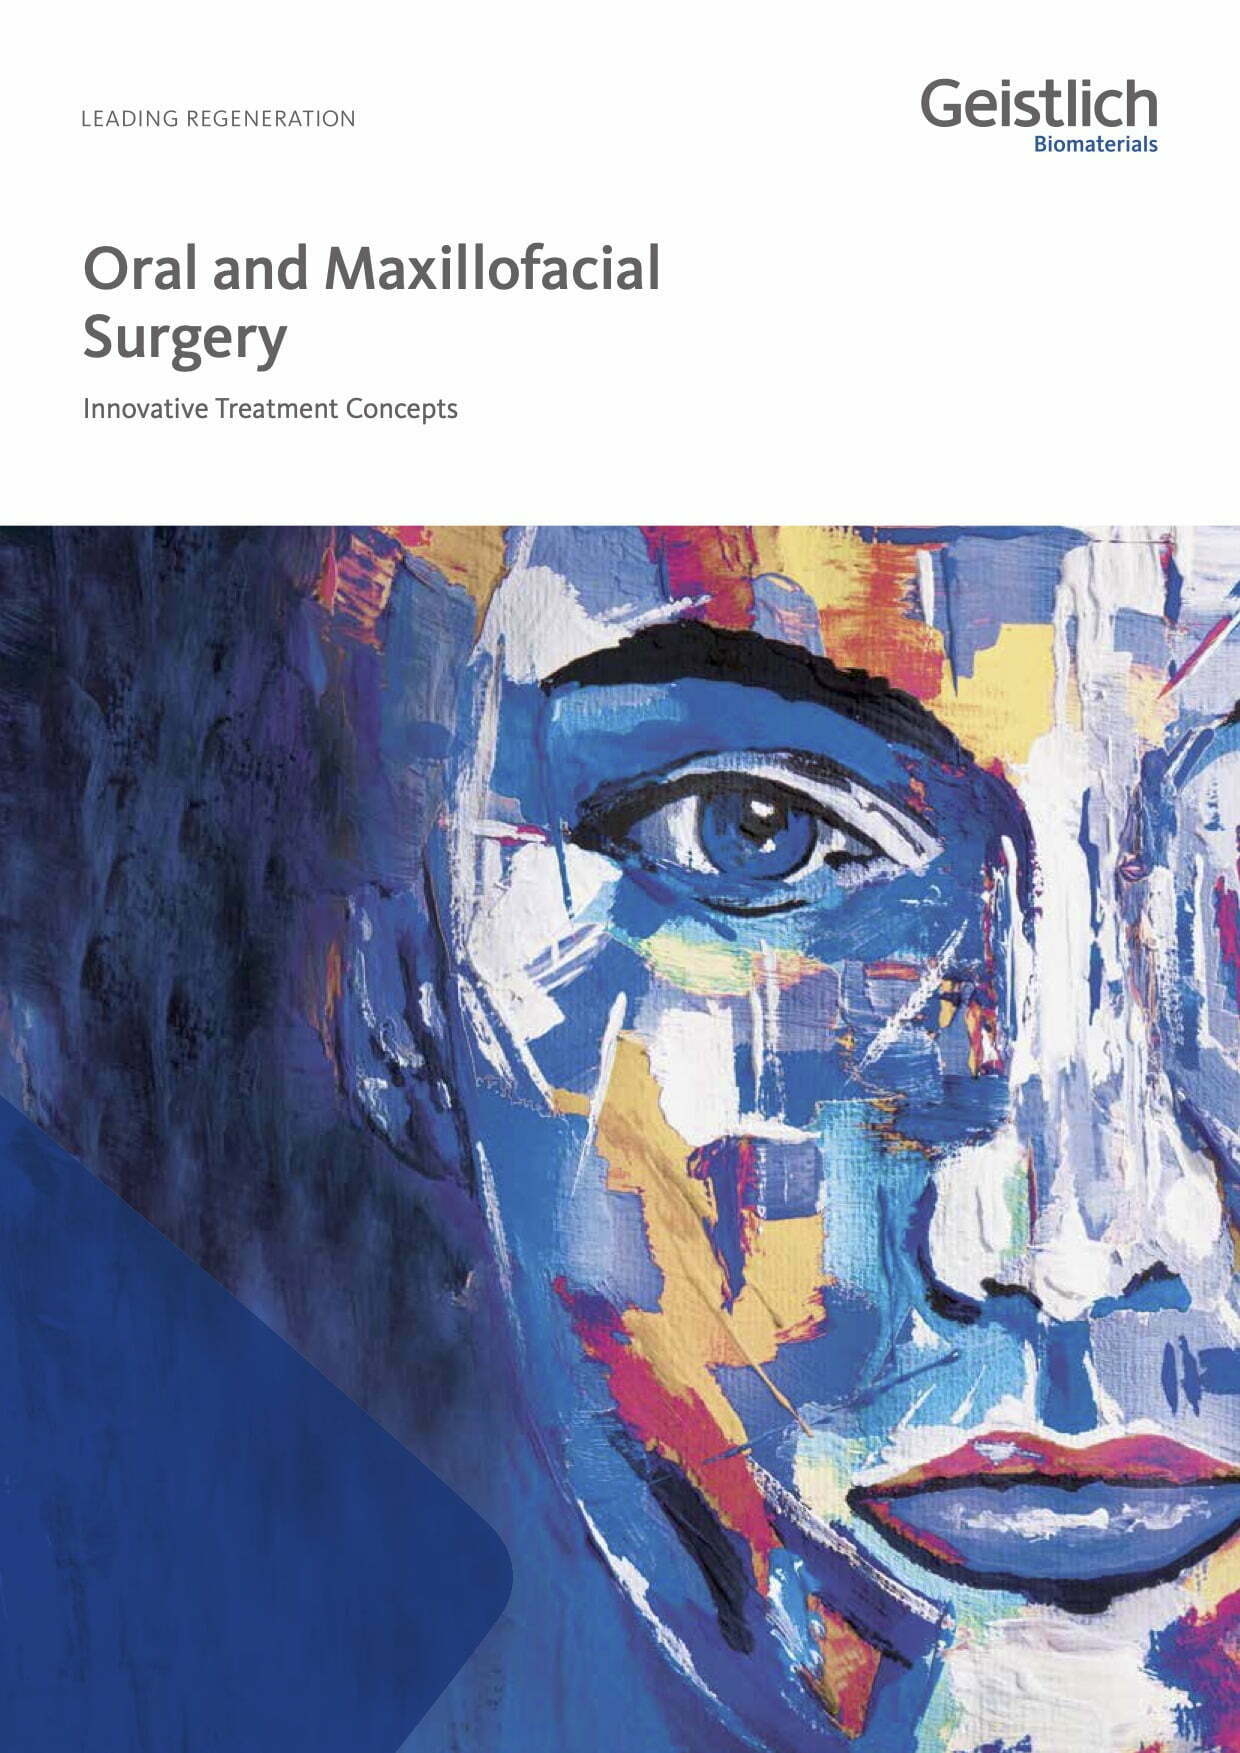 Innovative treatment concepts in oral and maxillofacial surgery